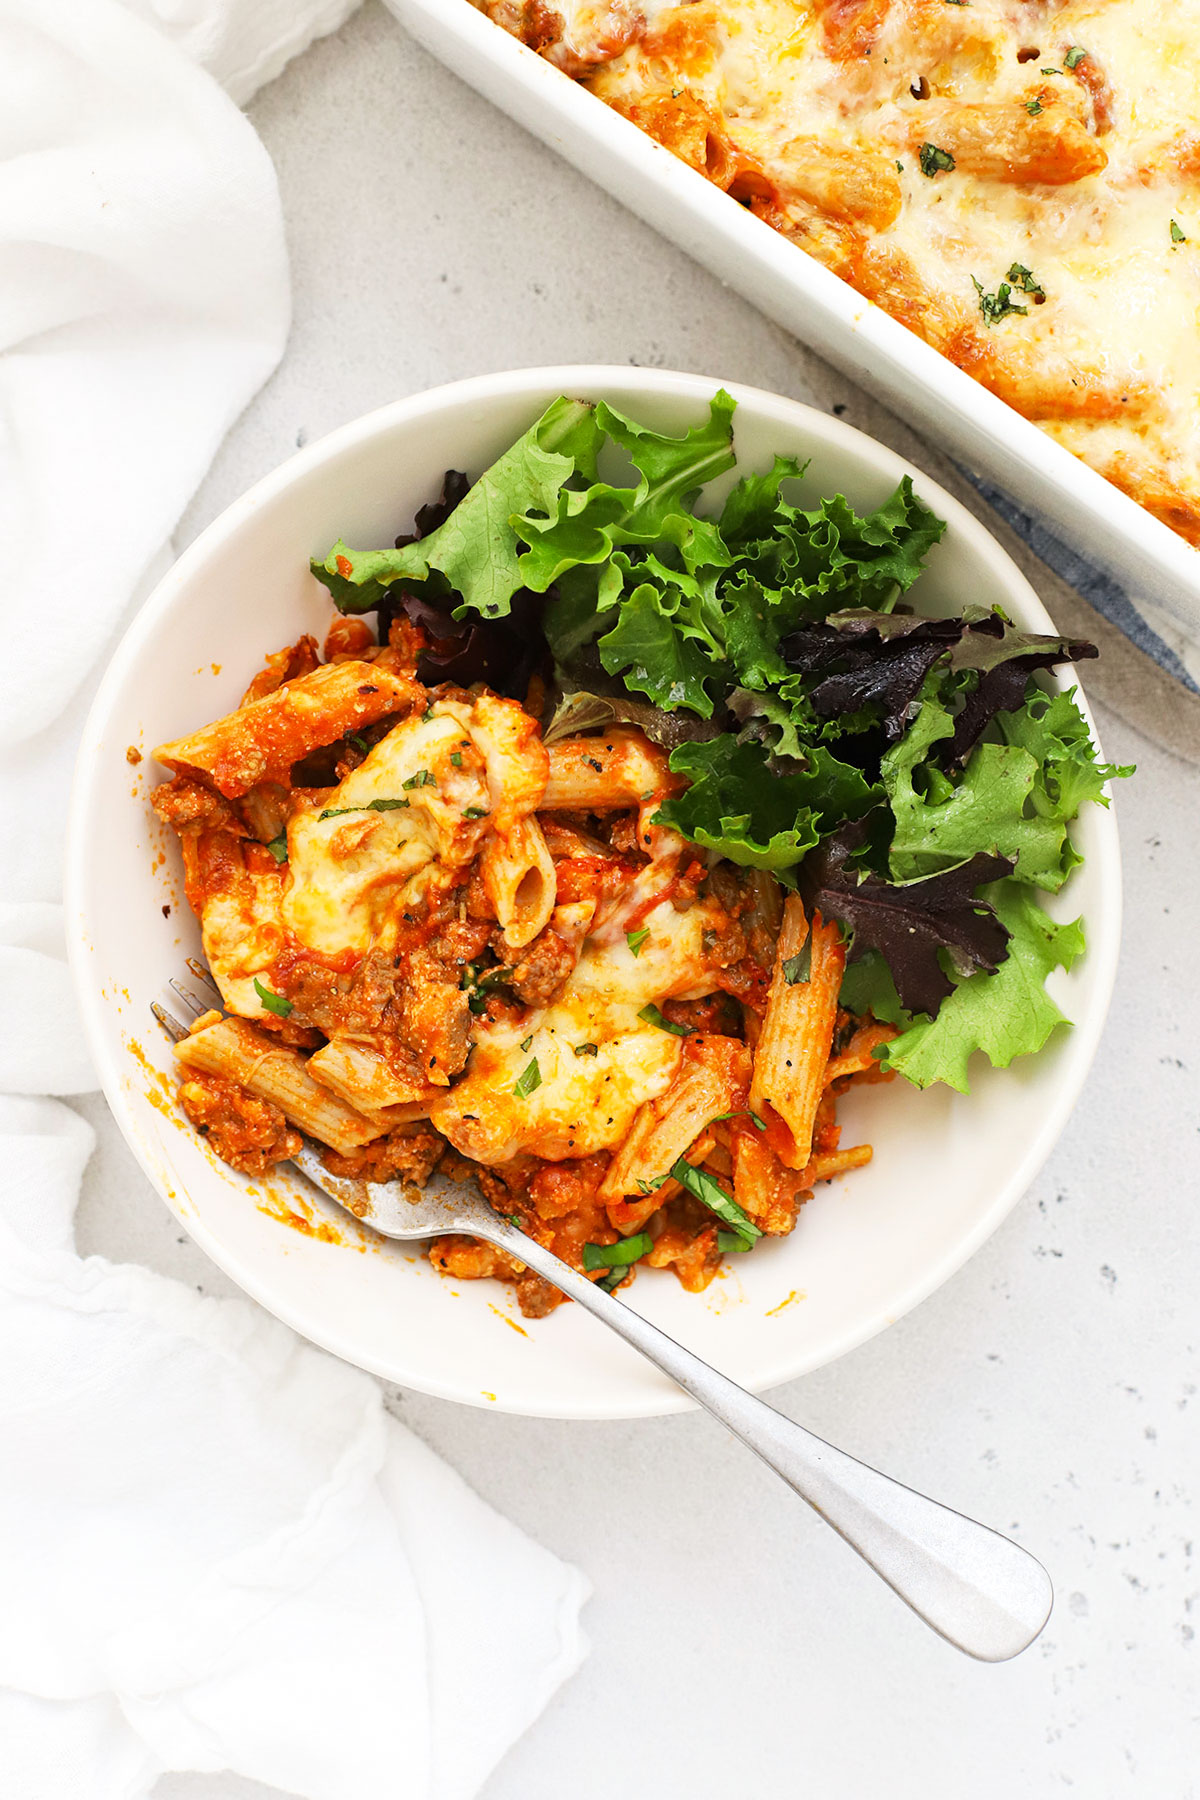 gluten-free baked ziti on a plate with a green side salad